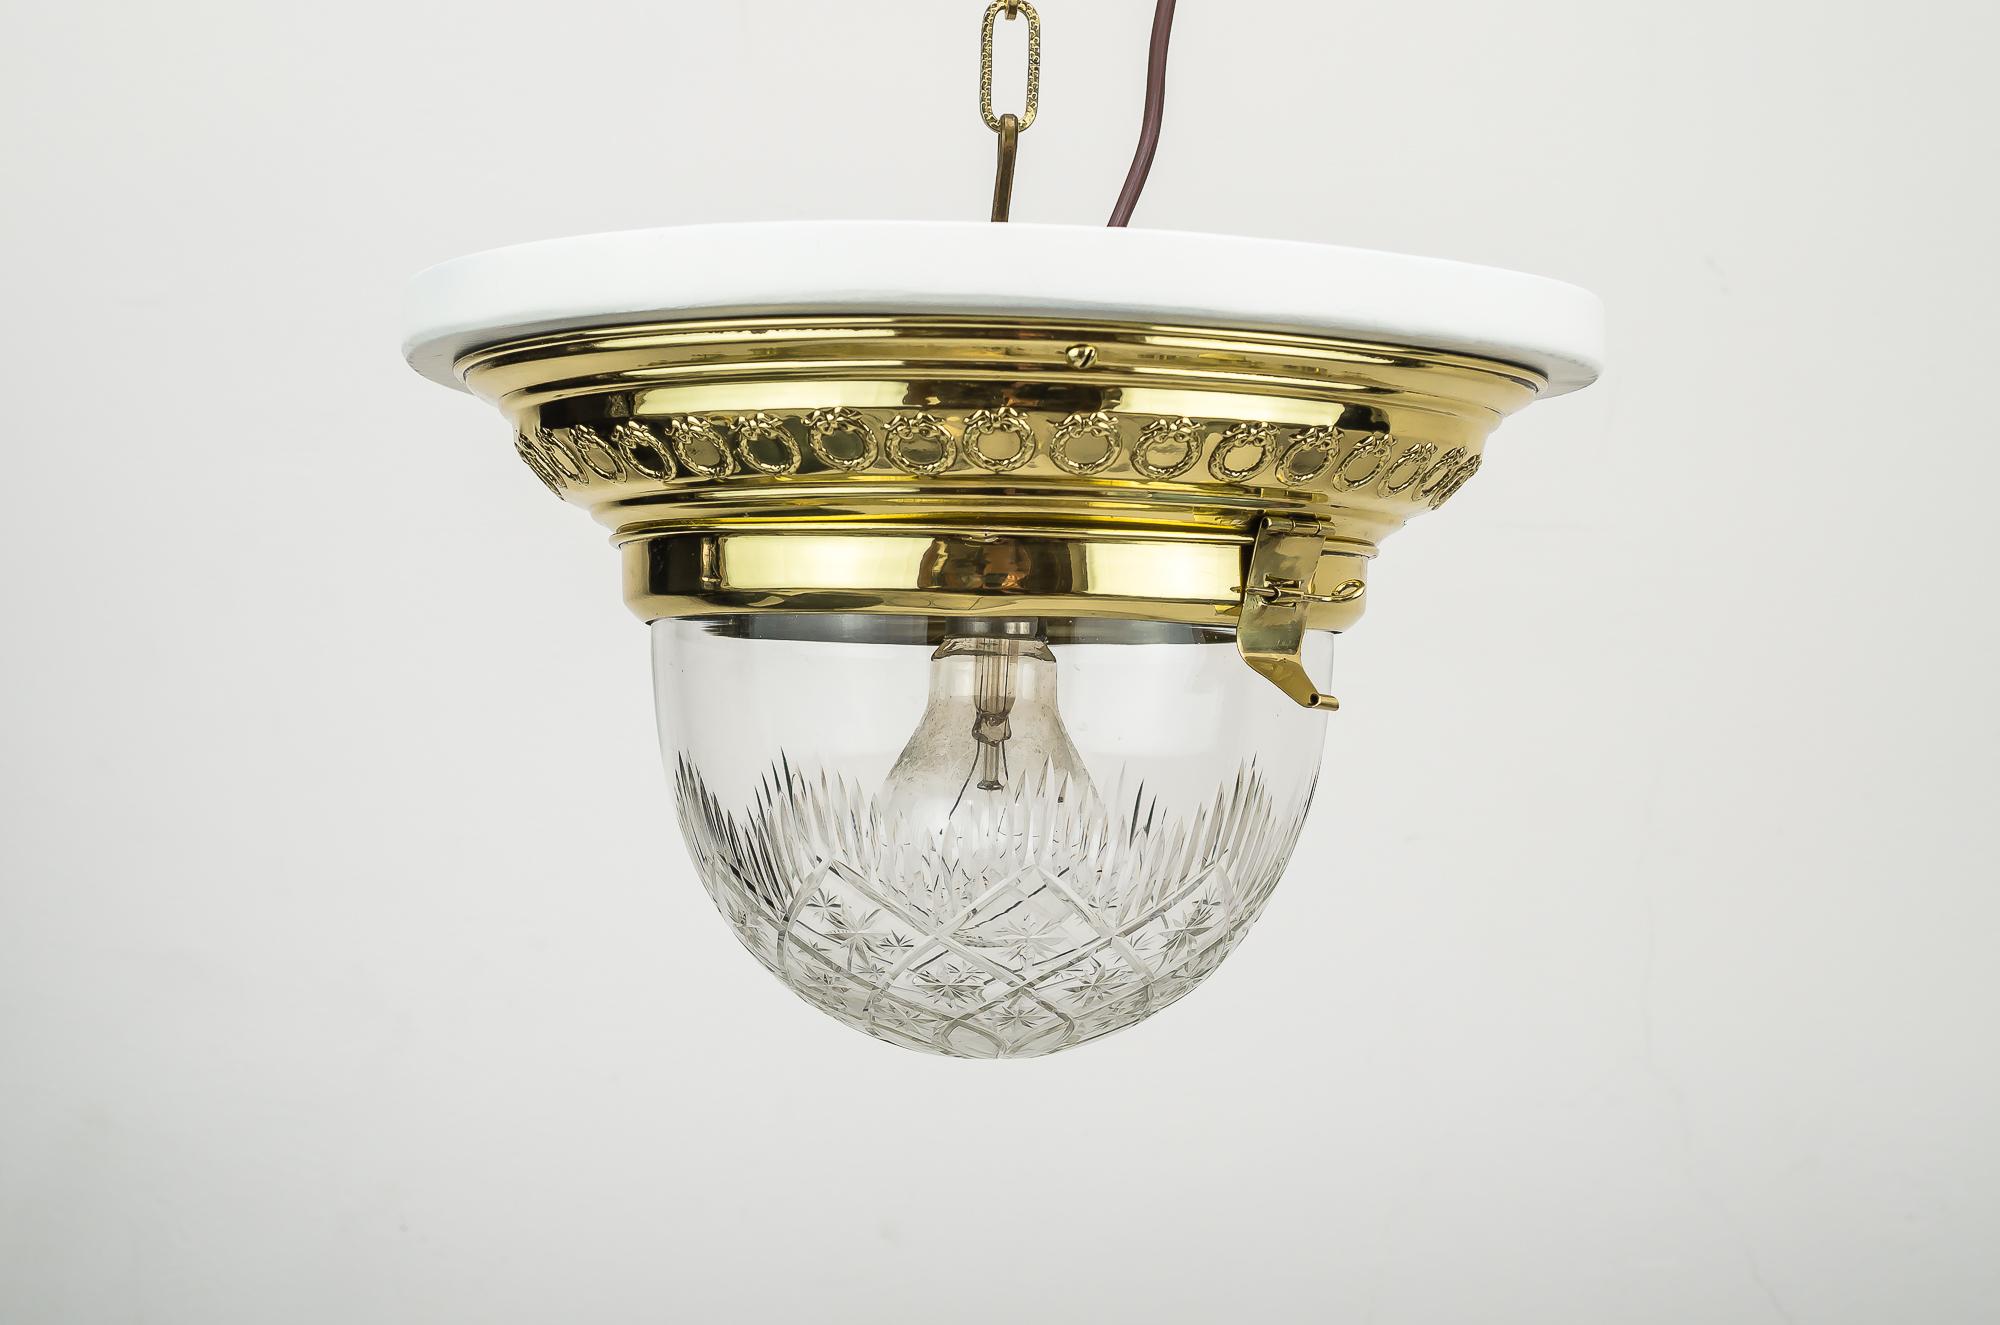 Jugendstil ceiling lamp 1906 with original glass and painted wood plate.
Polished and stove enameled.